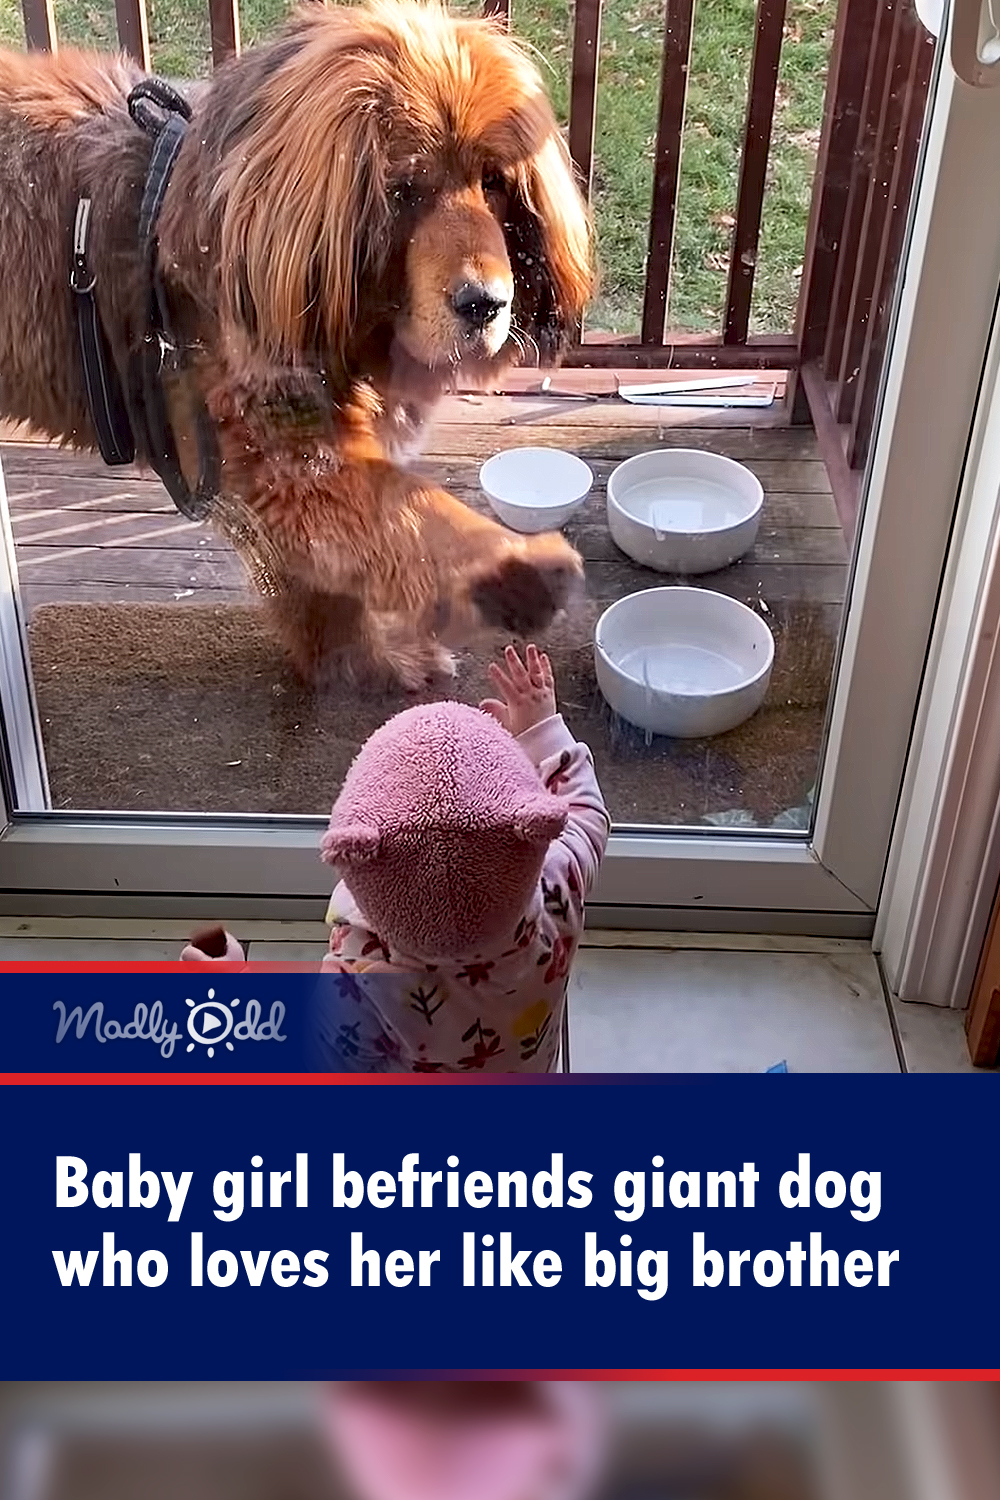 Baby girl befriends giant dog who loves her like big brother